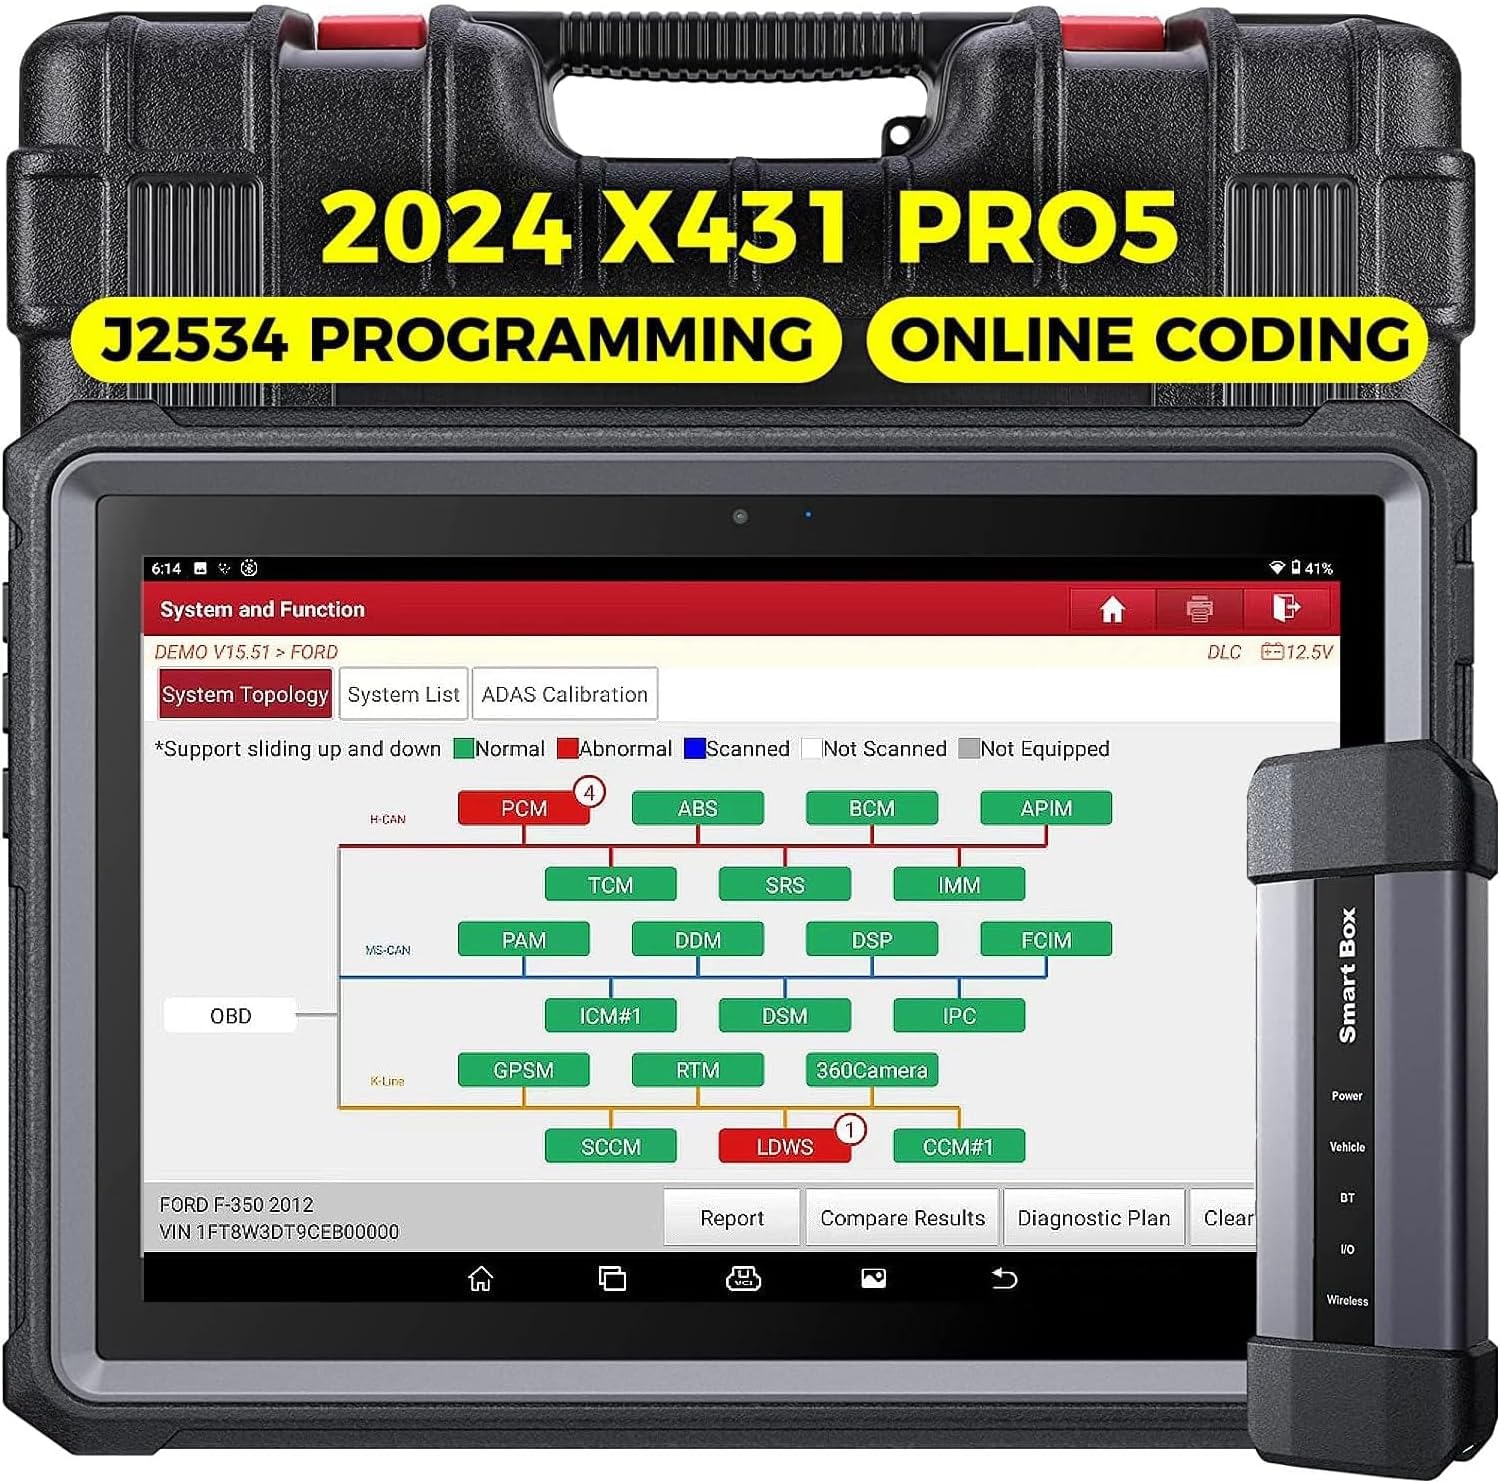 LAUNCH, X-431 PRO5, Professional Car Diagnostic Tool, SCN Coding for Benz, ECU  Online Programming for BMW